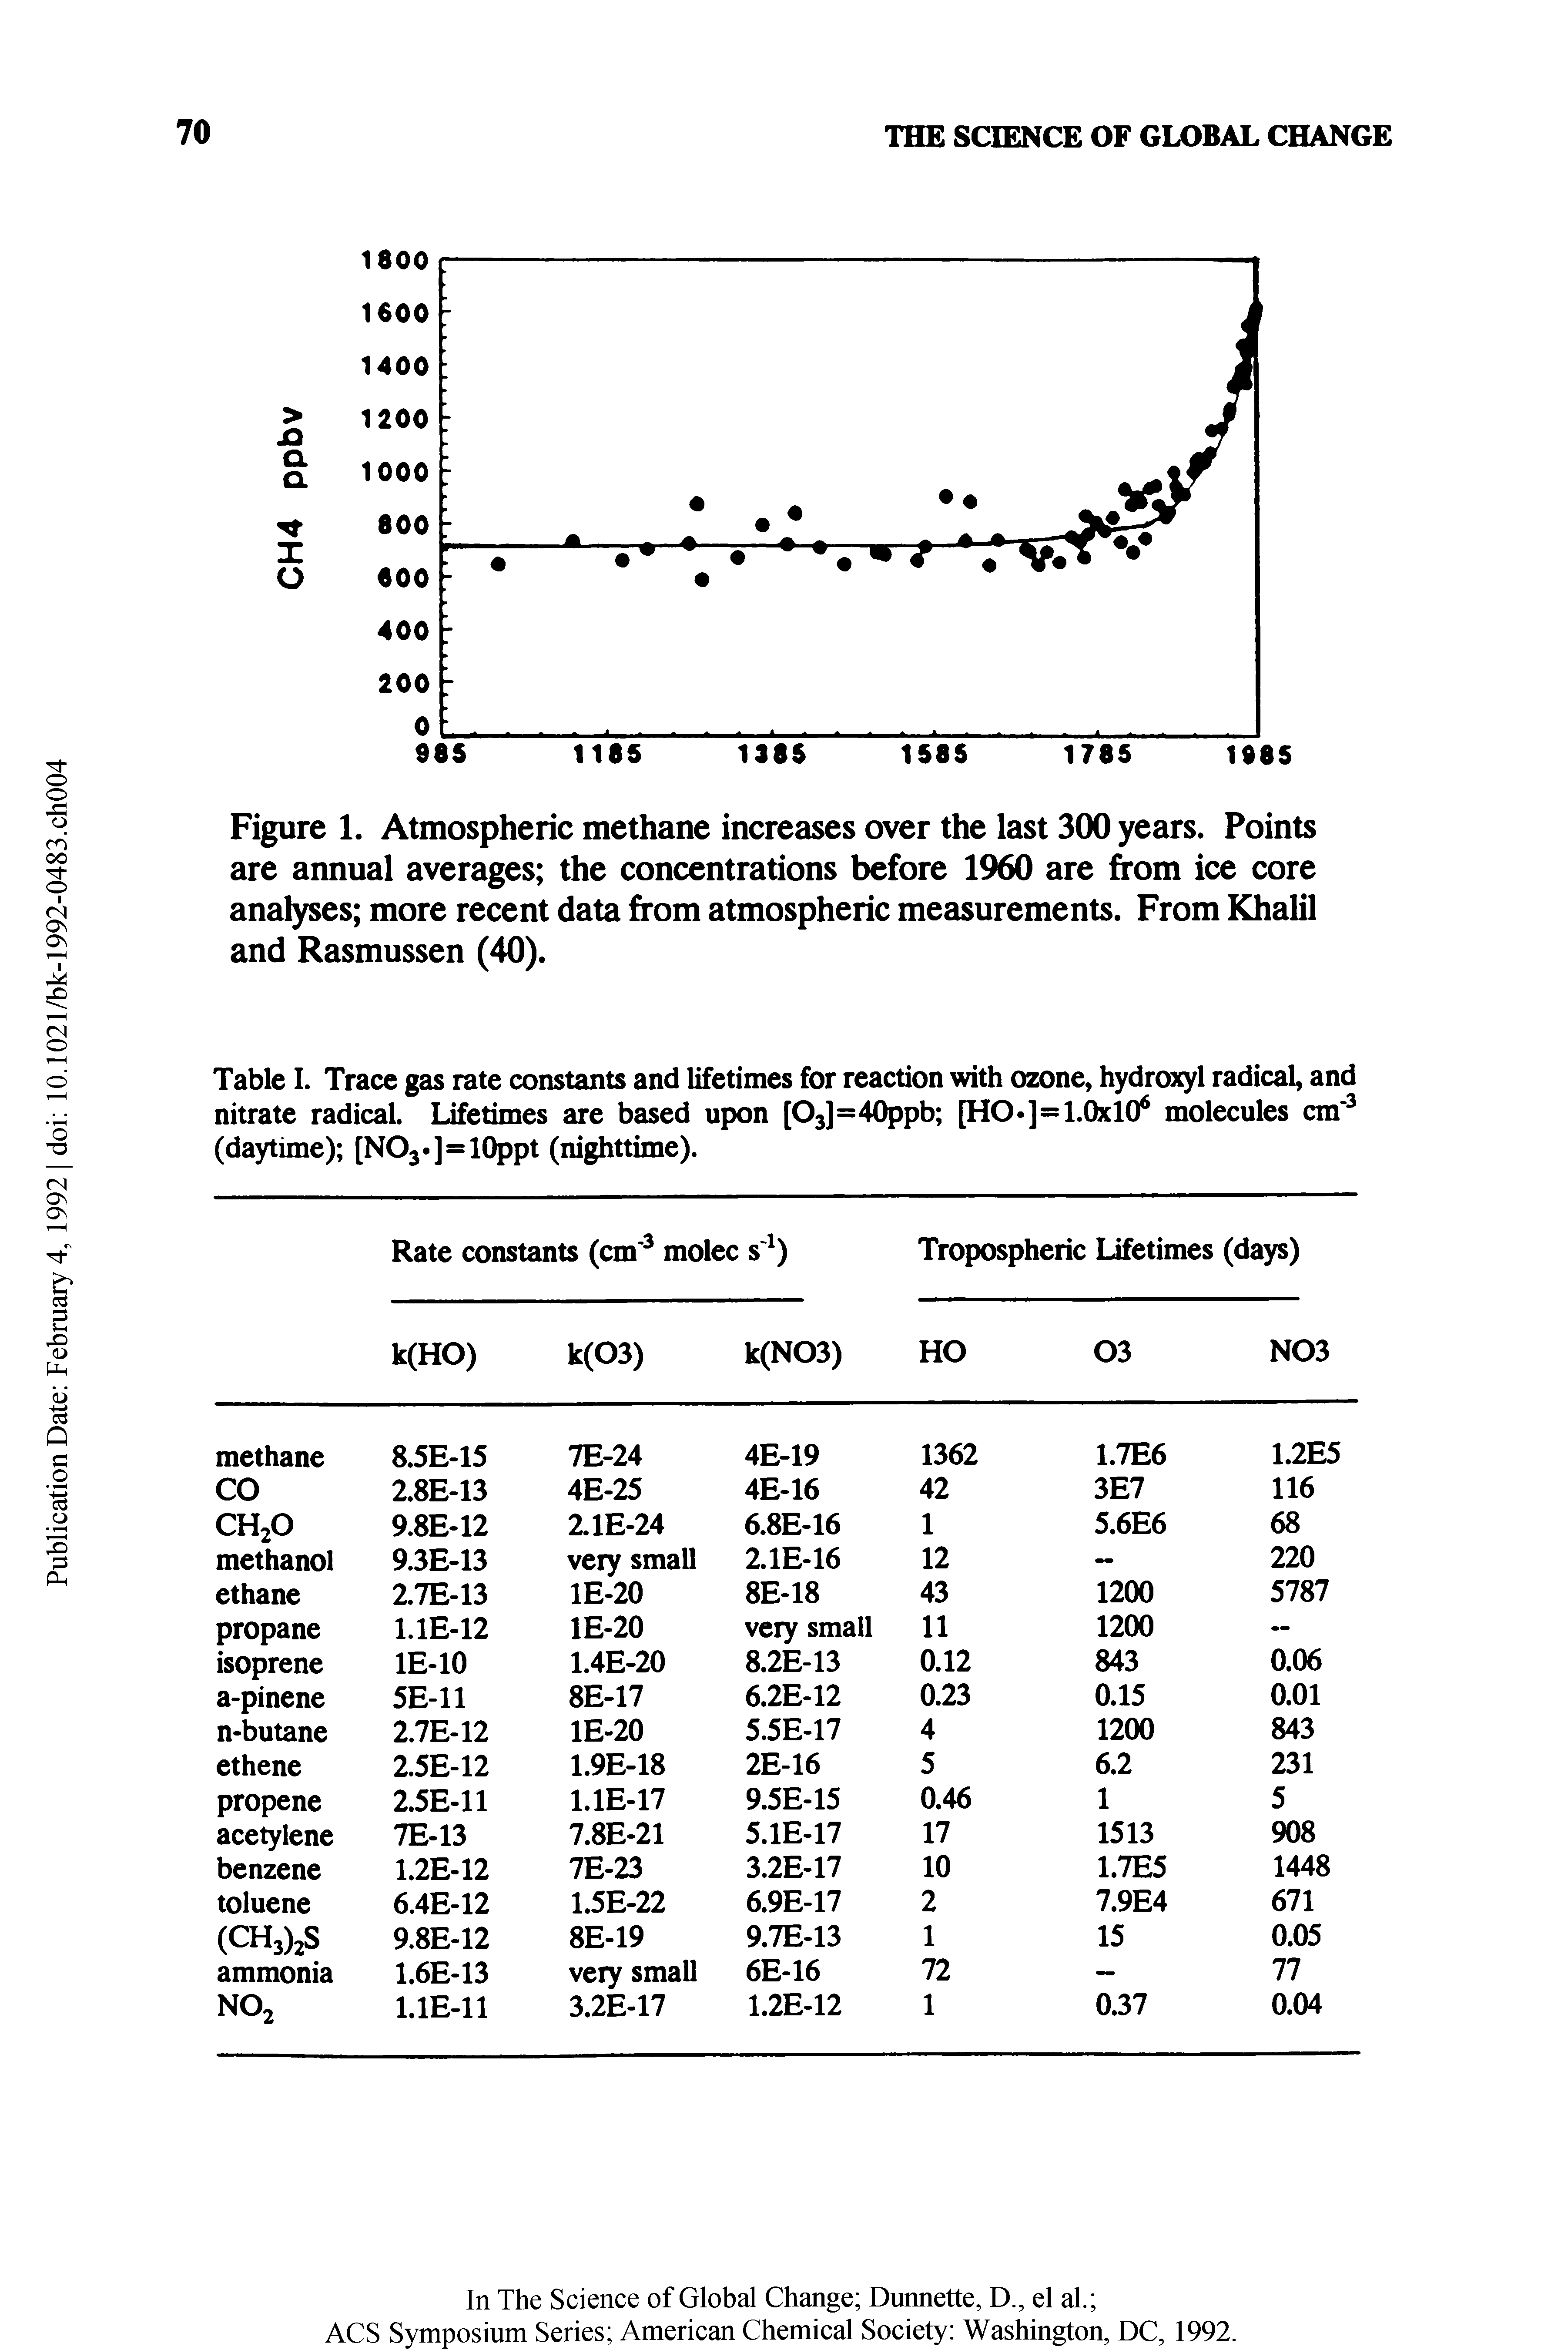 Table I. Trace gas rate constants and lifetimes for reaction with ozone, hydroxyl radical, and nitrate radical. Lifetimes are based upon [O3]=40ppb [HO ]=1.0x10 molecules cm (daytime) [NO3 ]=10ppt (nighttime).